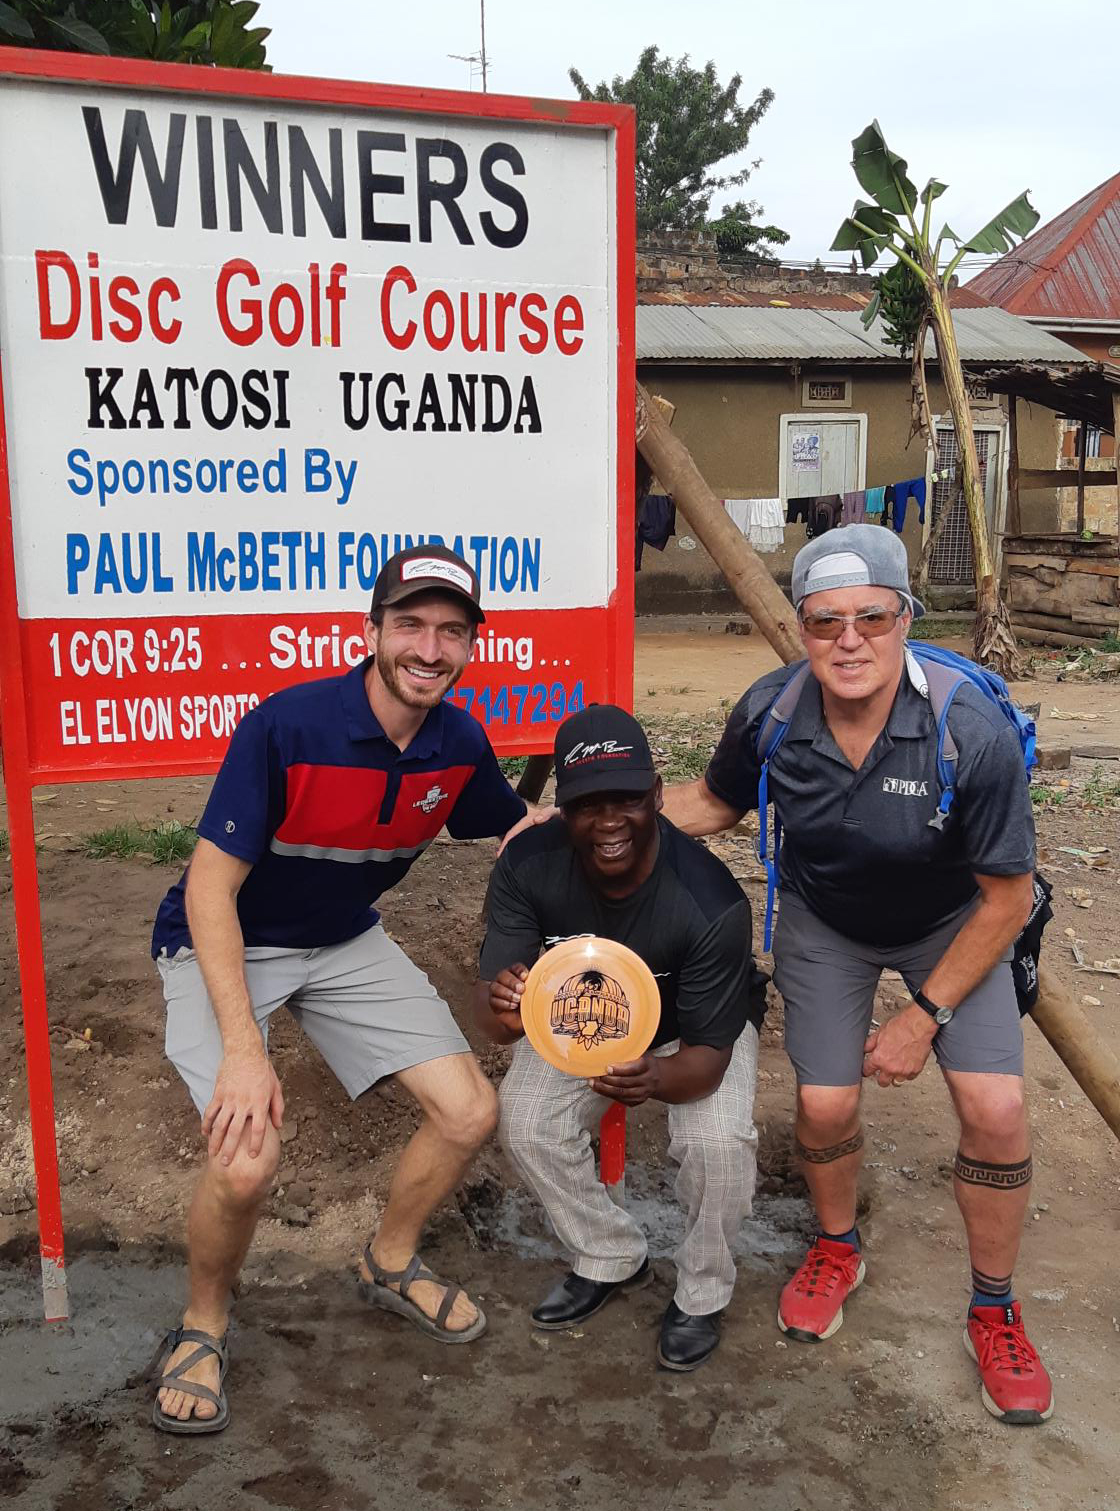 pmfs_zack_smith_pdgas_brian_hoeniger_join_pastor_timothy_in_opening_the_course_-_credit_pdga.jpg